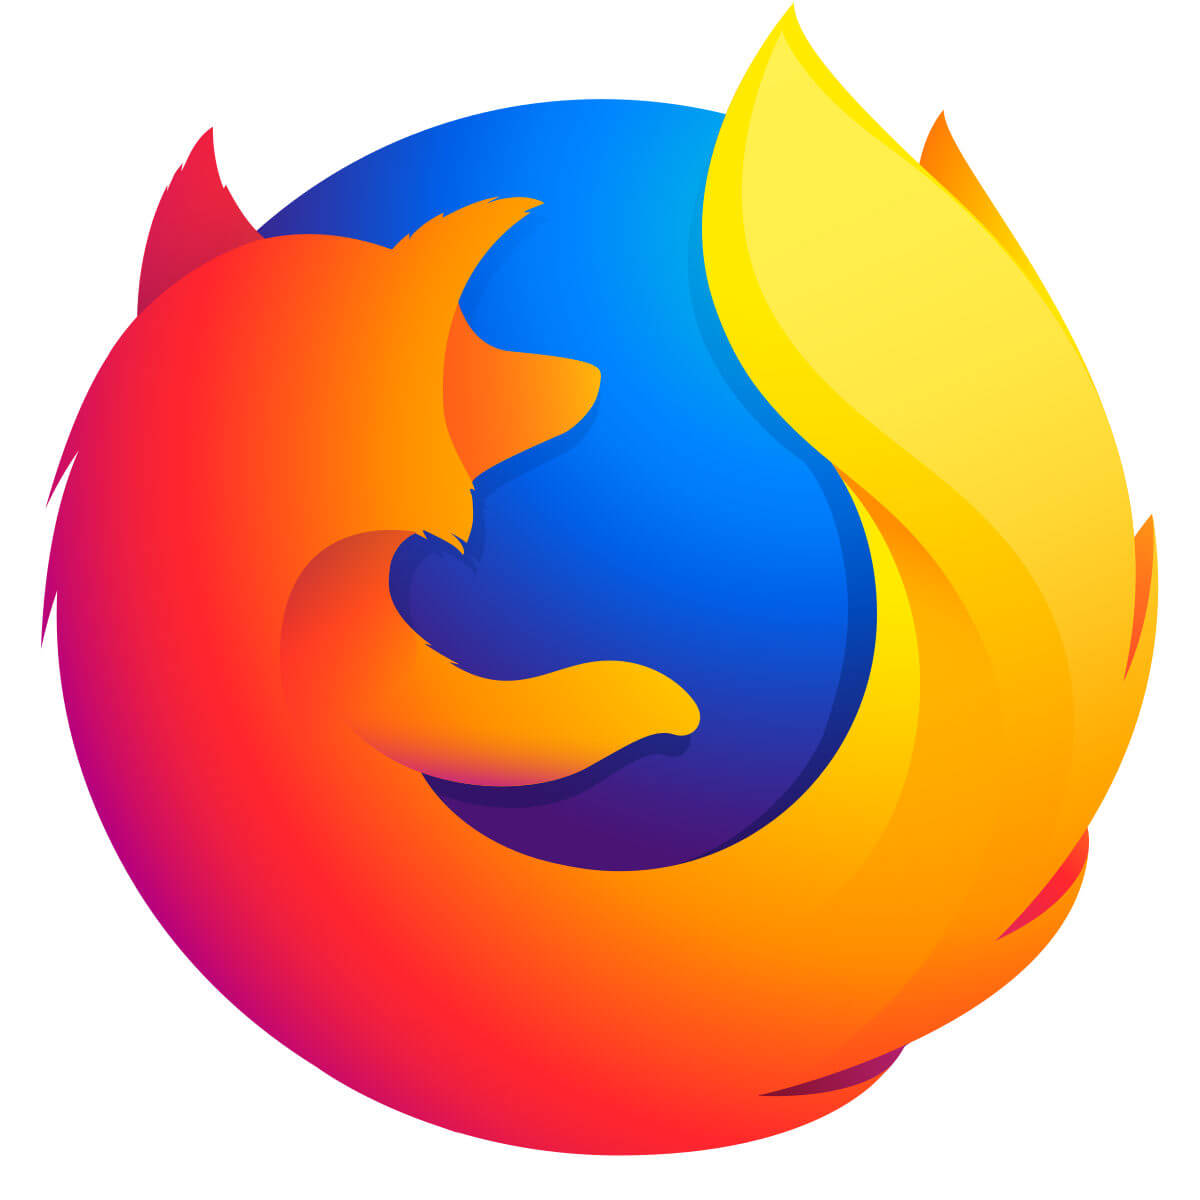 download firefox browser for windows 10